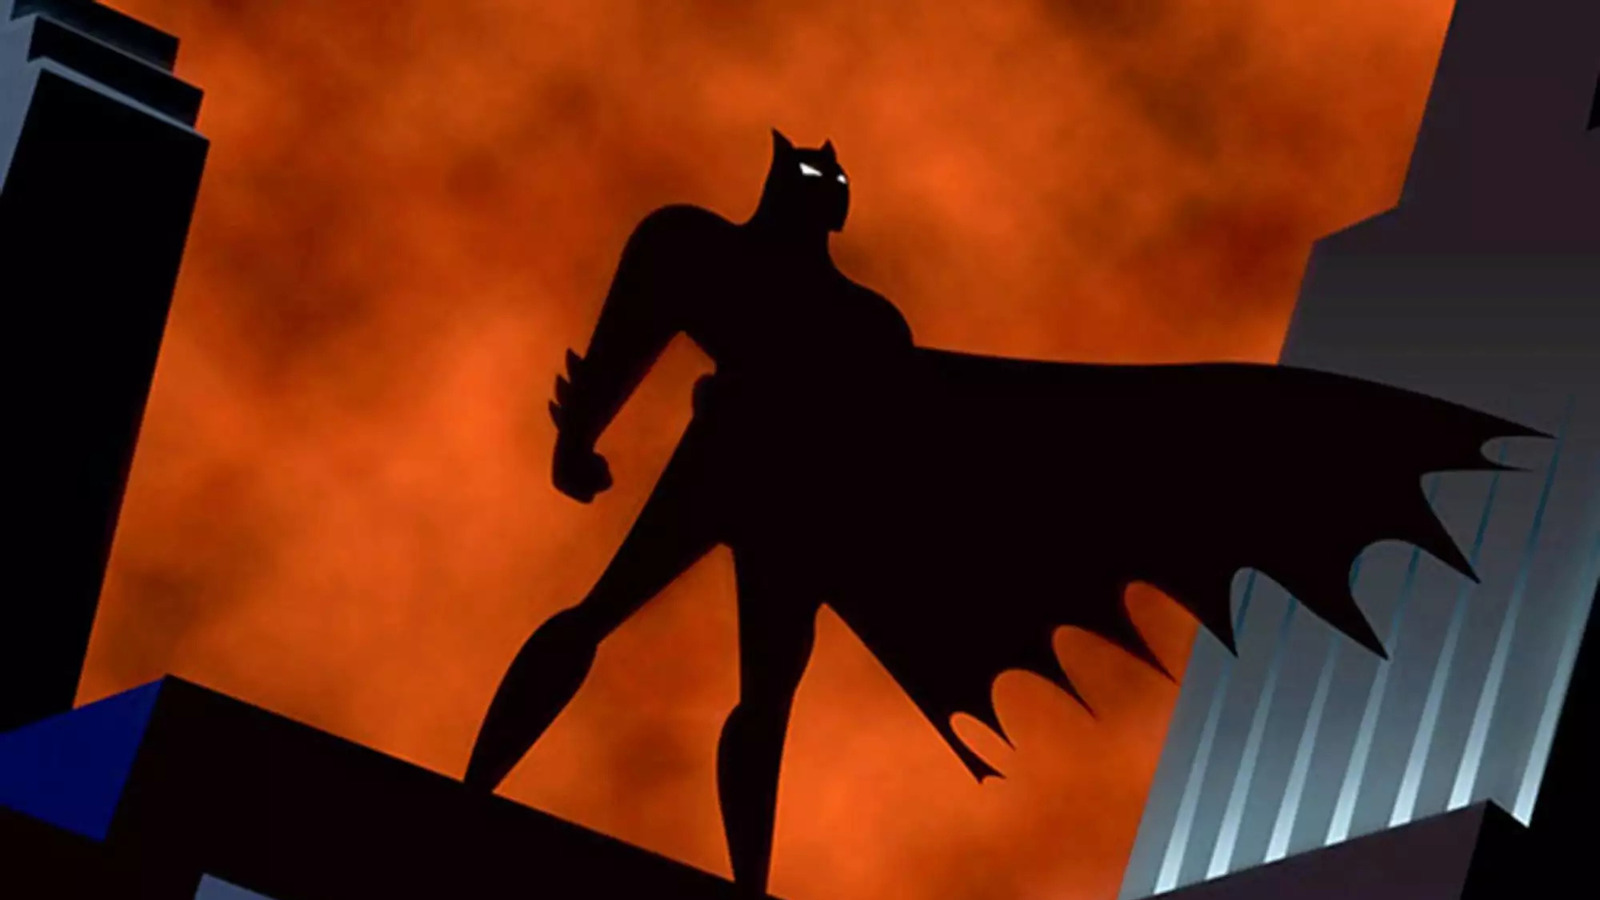 12 Underrated Episodes Of Batman: The Animated Series